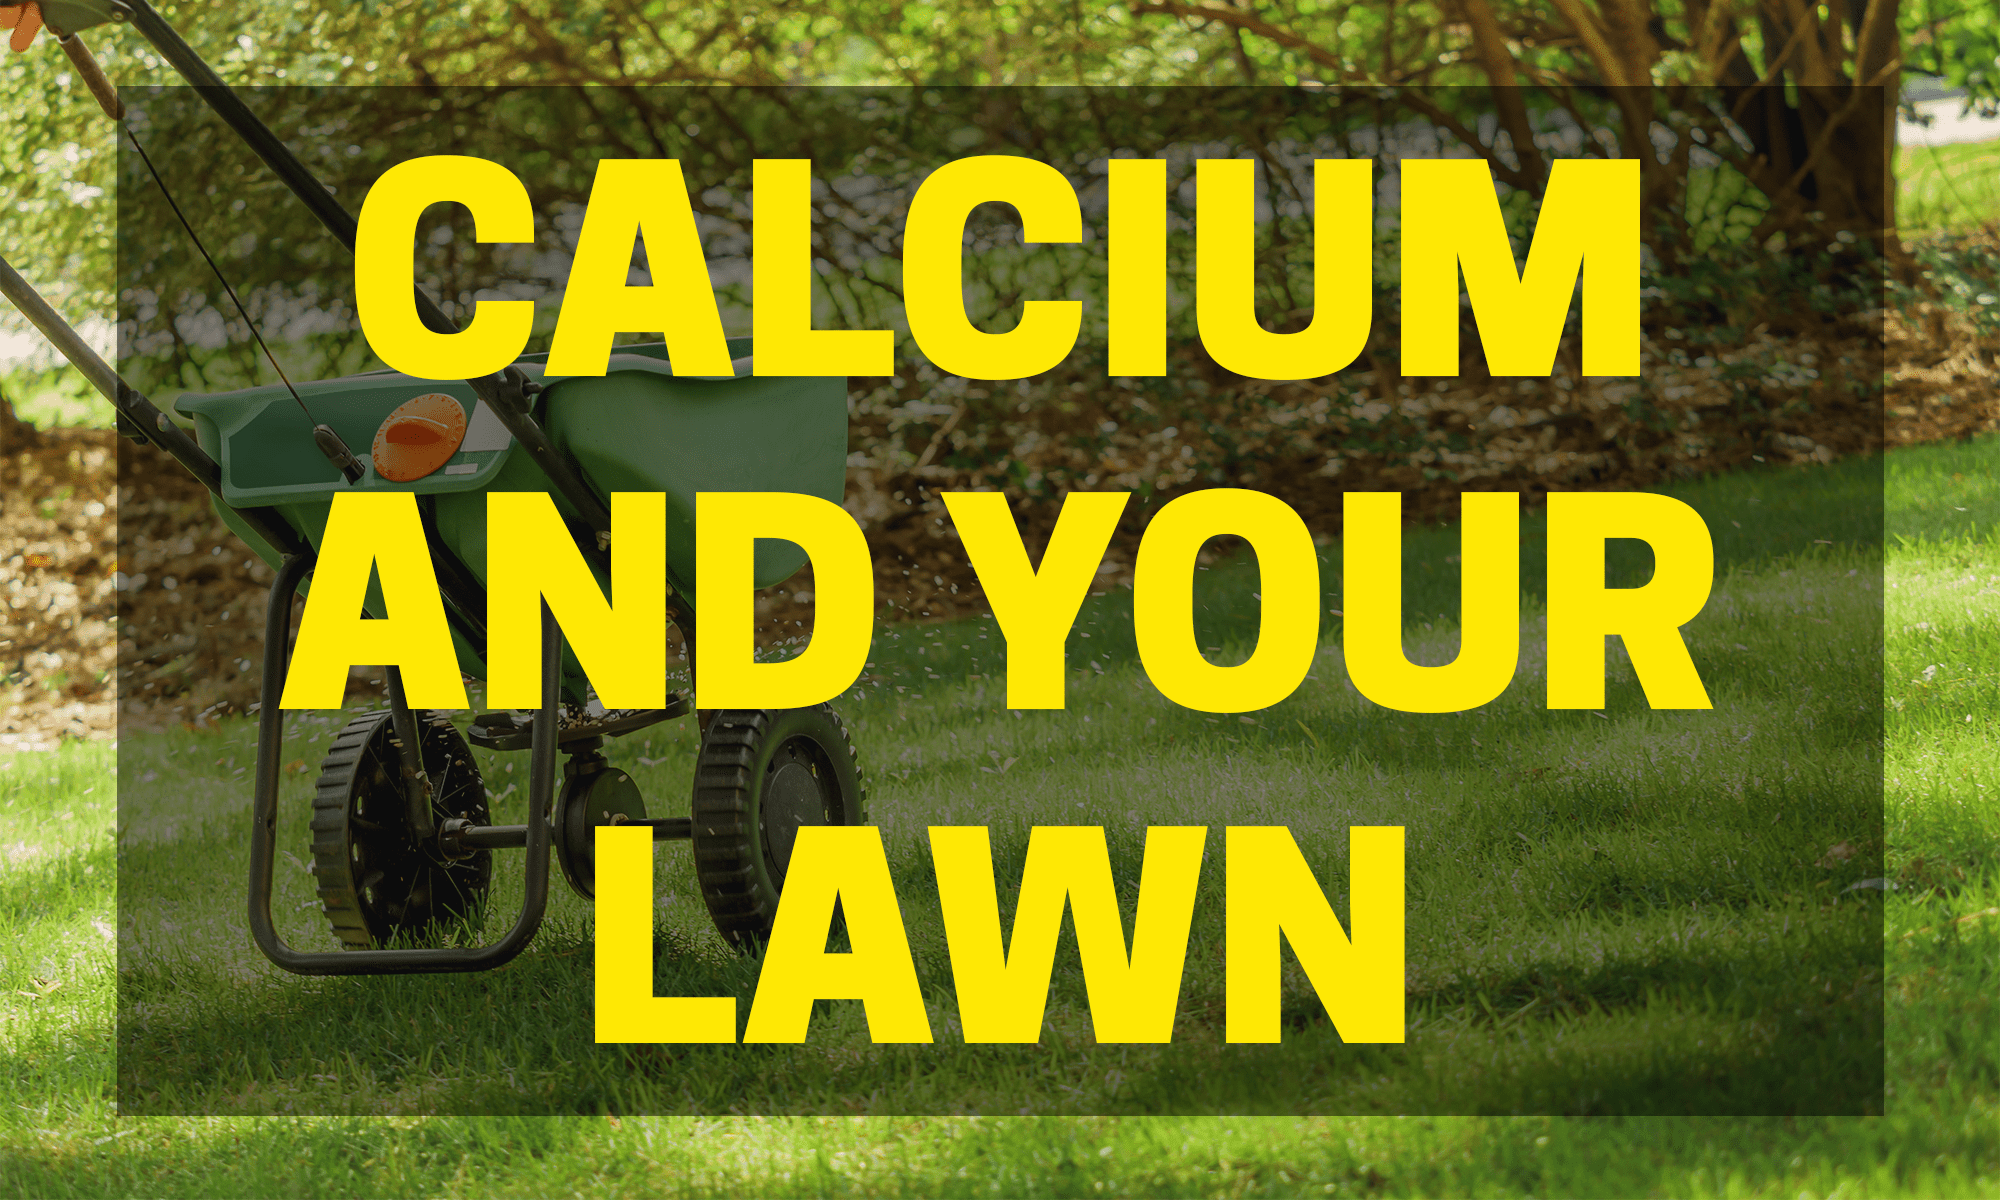 Calcium and Your Lawn